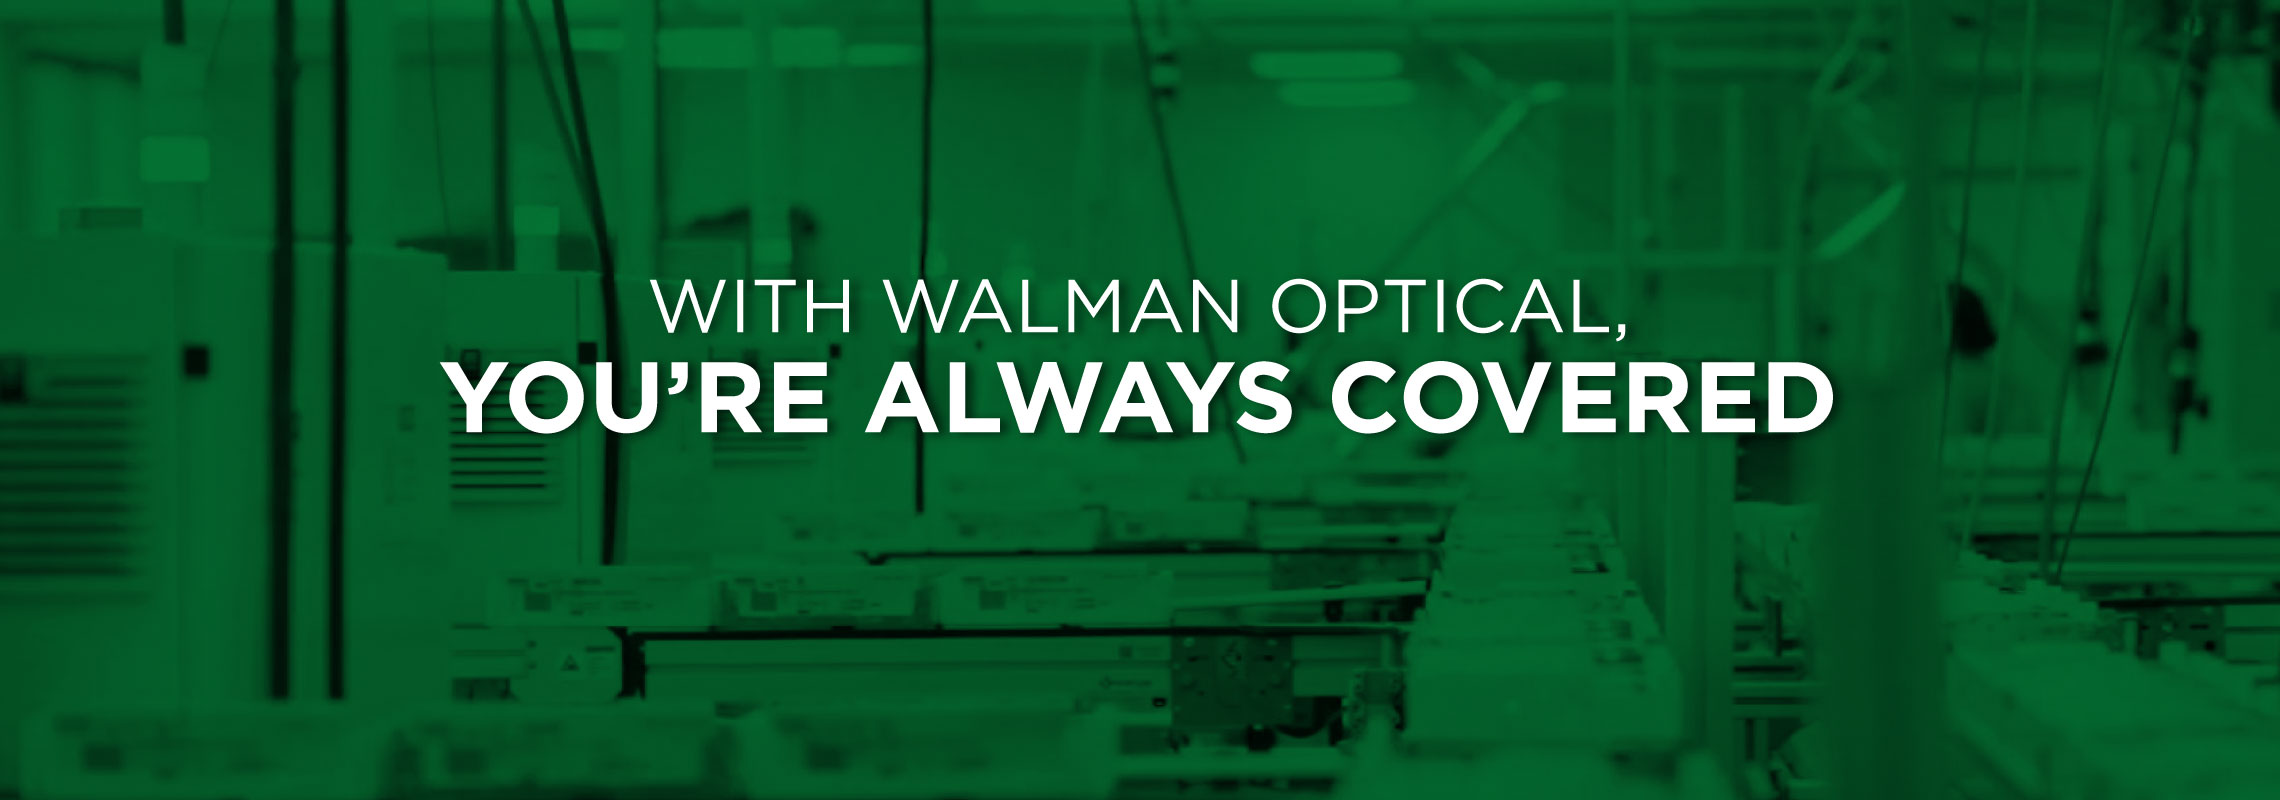 with-walman-optical-you-are-always-covered-2